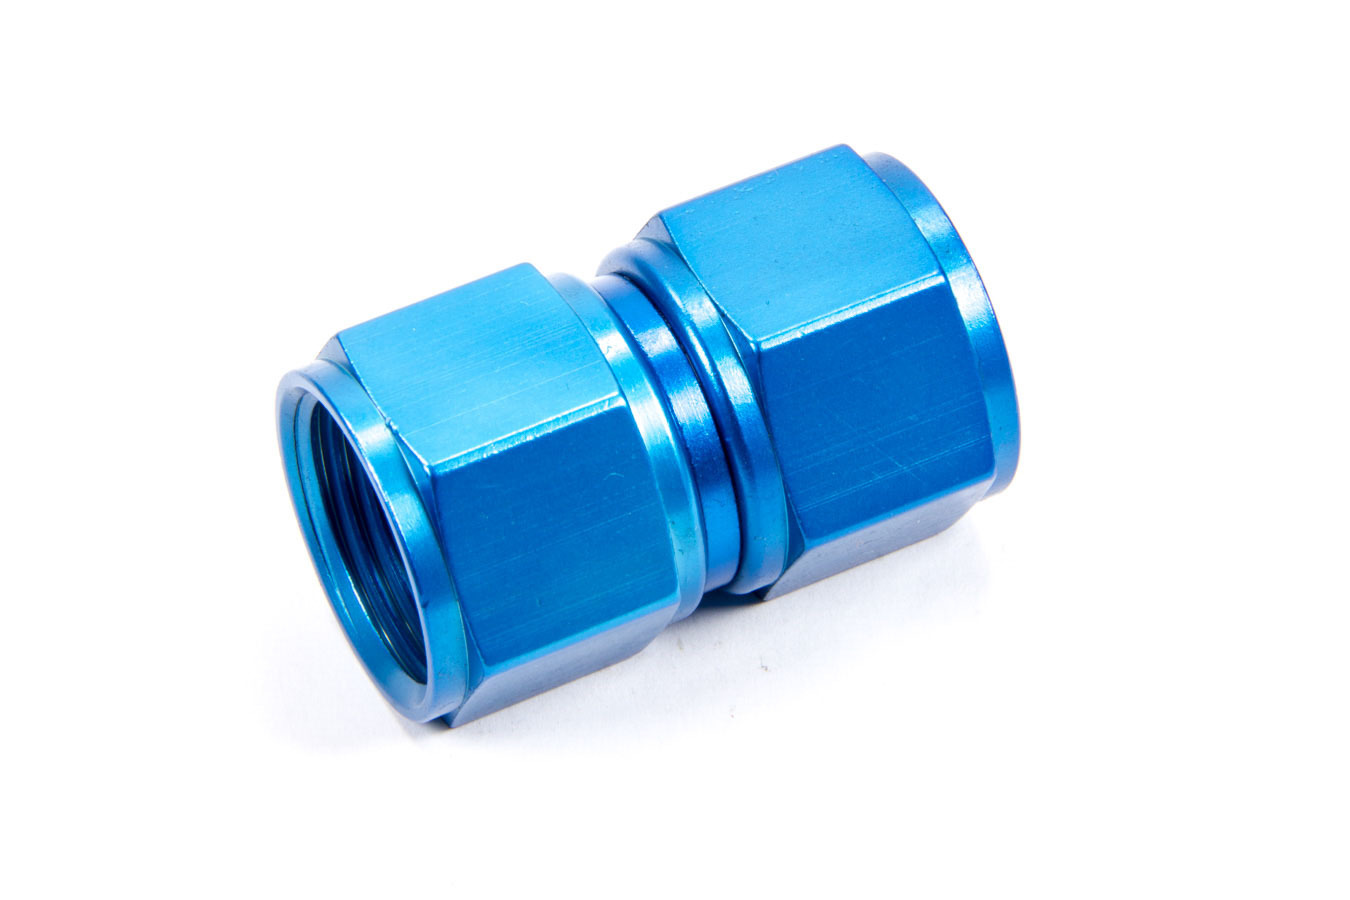 Fragola 496112 Fitting, Adapter, Straight, 12 AN Female Swivel to 12 AN Female Swivel, Aluminum, Blue Anodized, Each